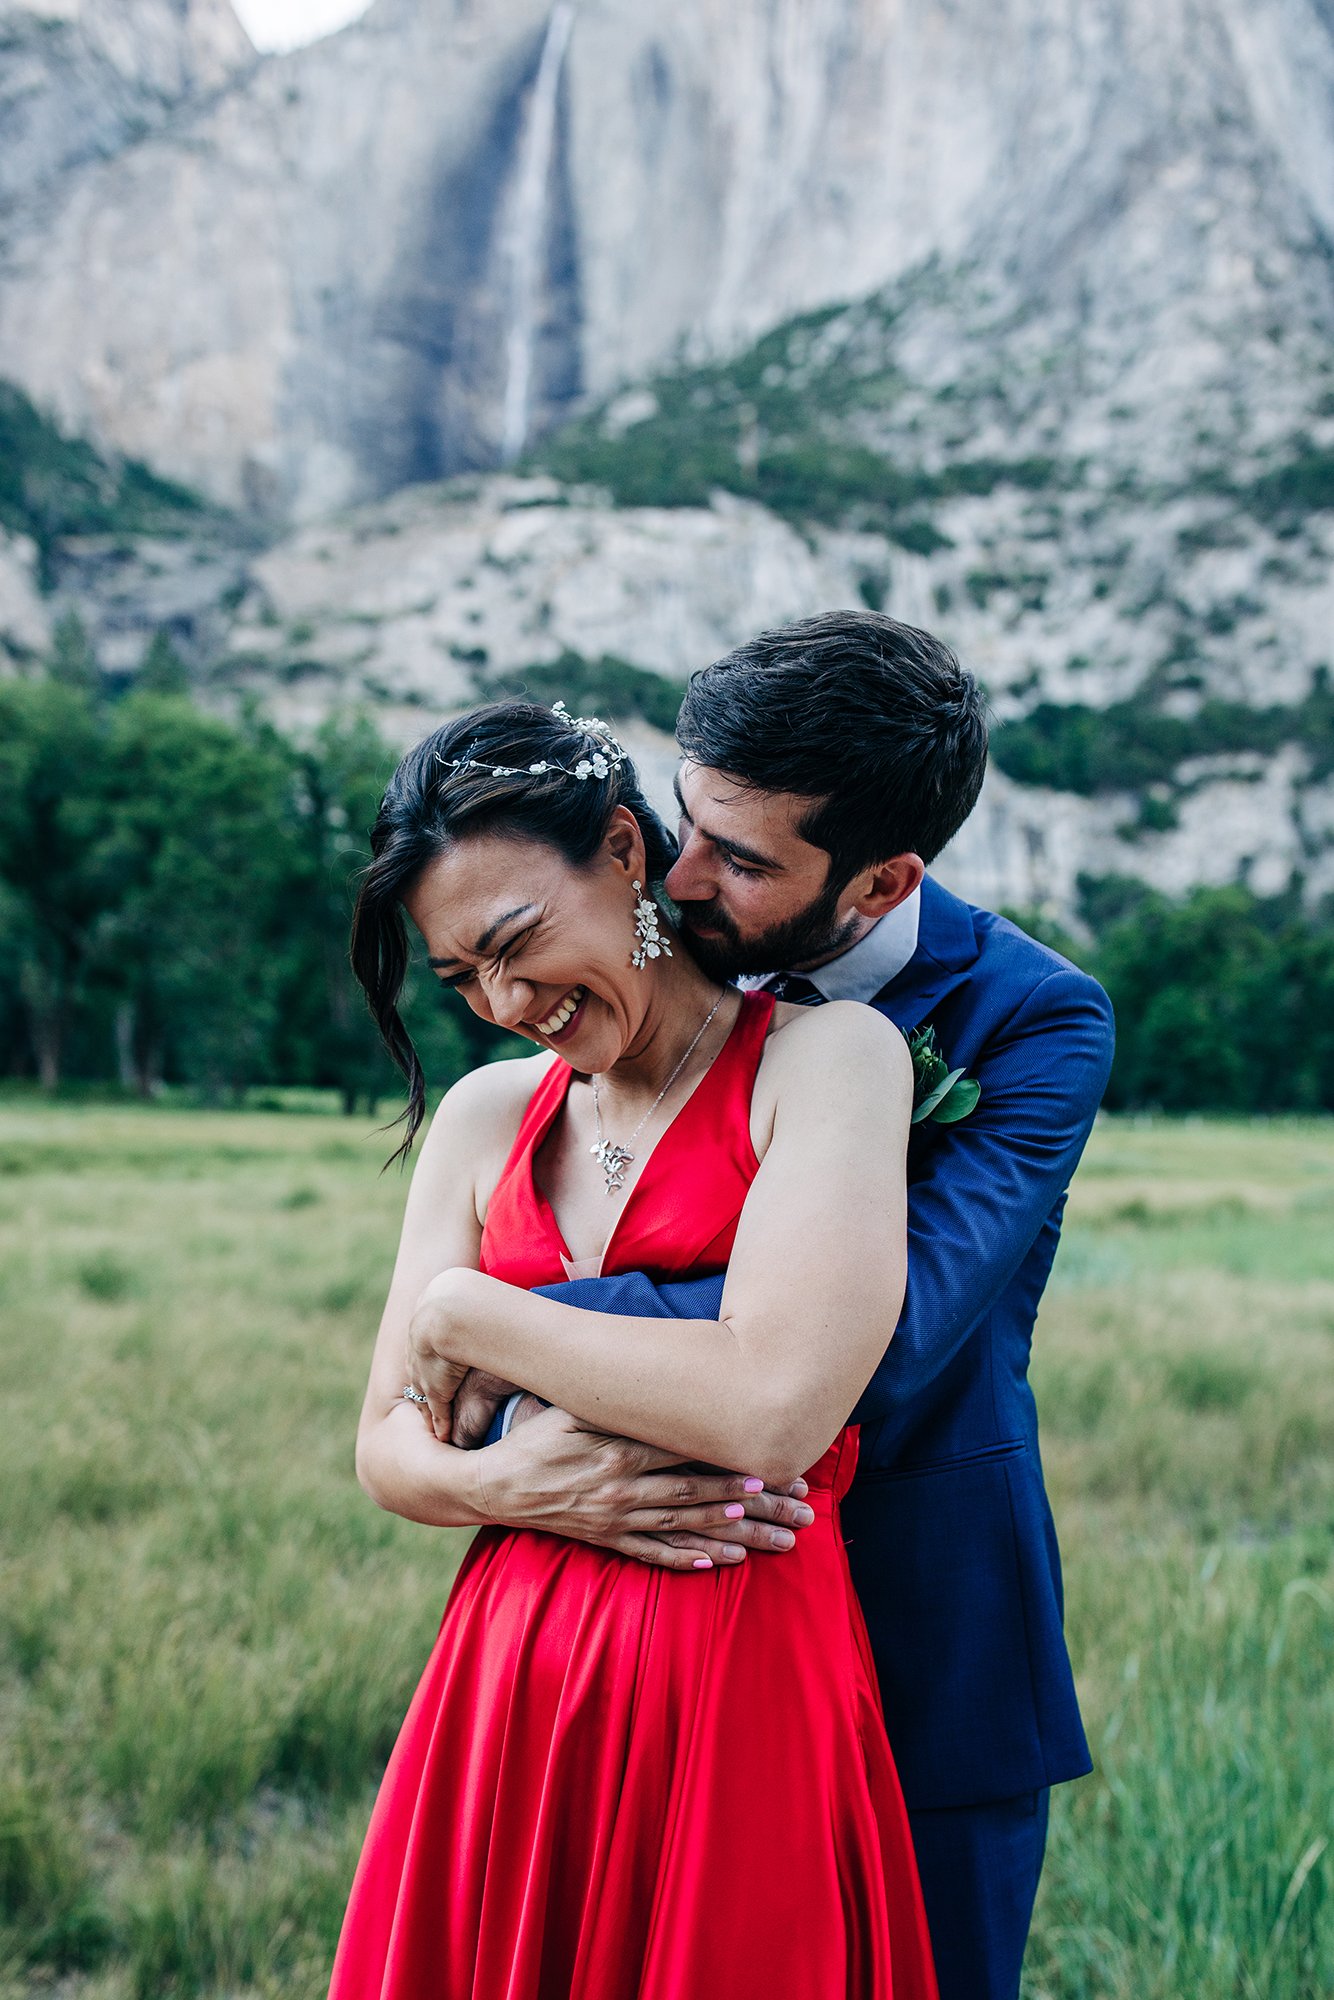 Yooree and Jarrod cuddle during their elopement in Yosemite National Park.